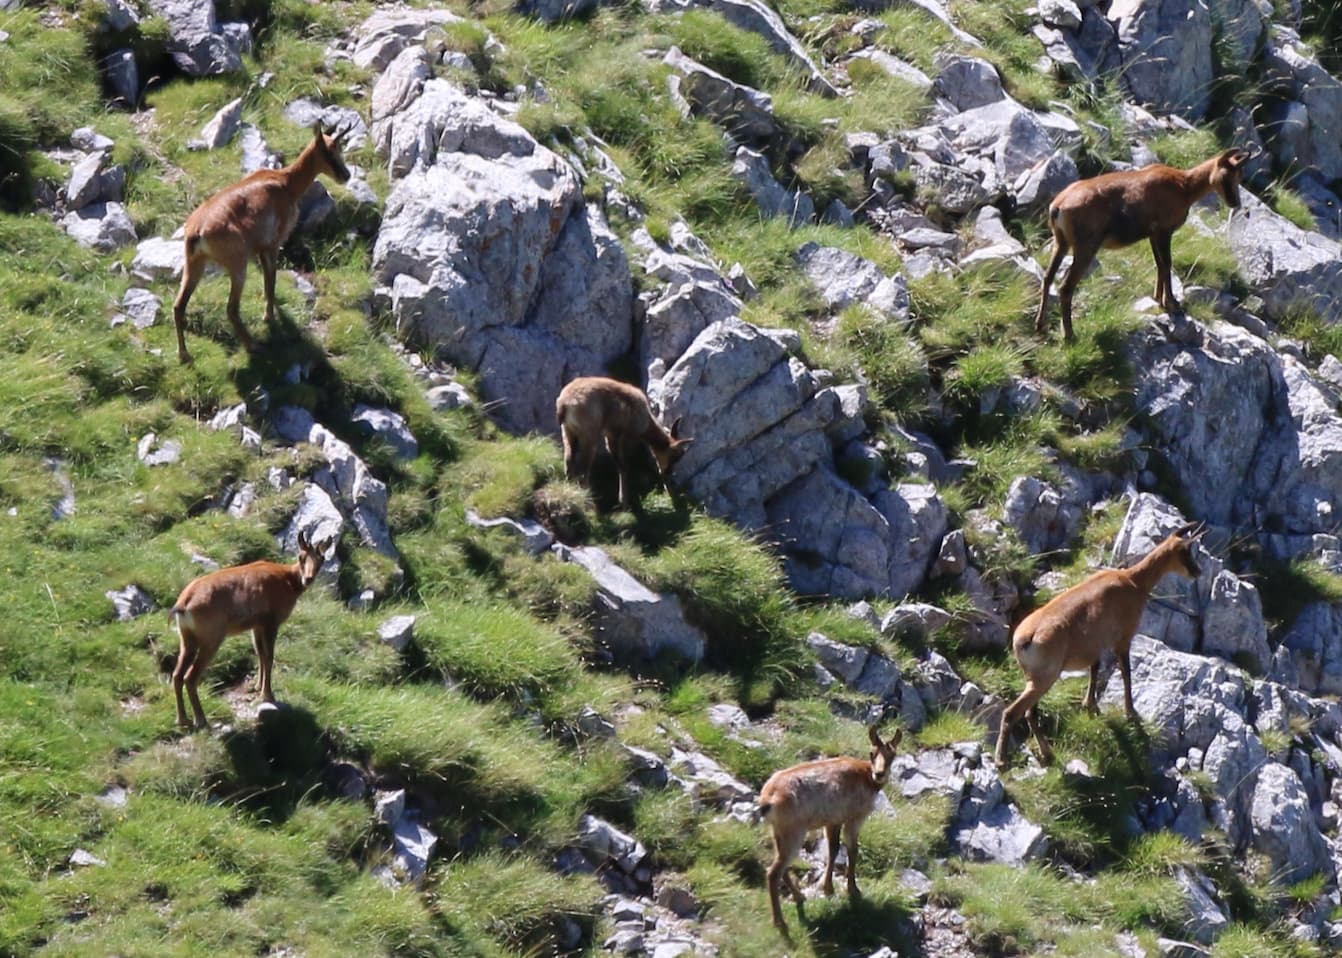 Females with their calf in a rocky area.